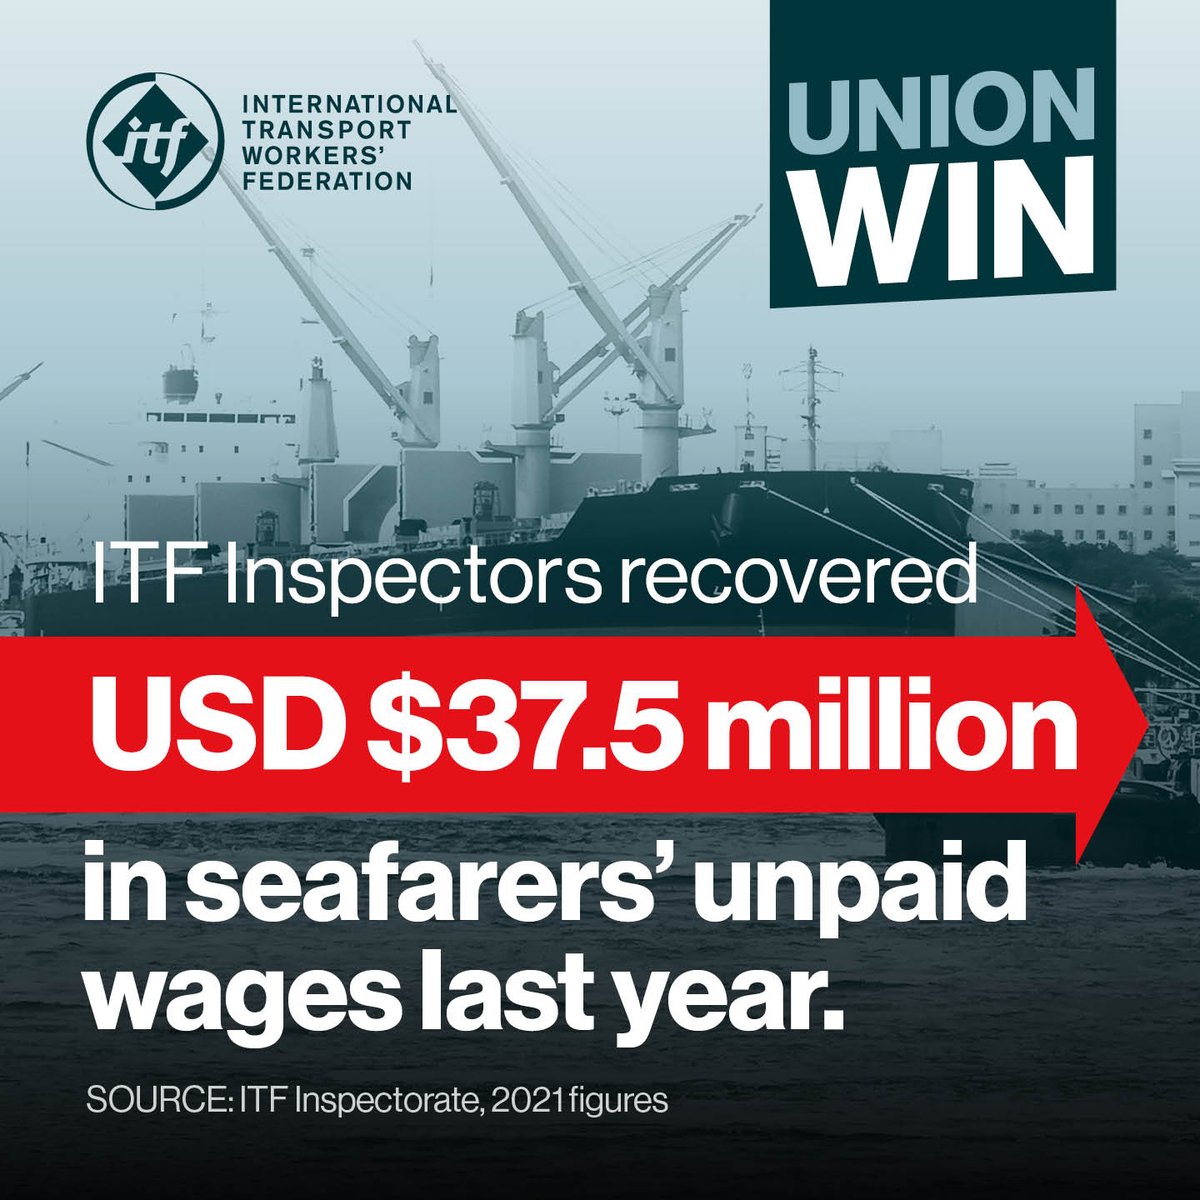 Union win! ✊In 2021, @ITFSeafSupport Inspectors worked with seafarers to recover USD $37.5 million in unpaid wages.

#ITFSeafarers #WeAreITF

Here’s how we helped👇
itfseafarers.org/en/news/itf-in…